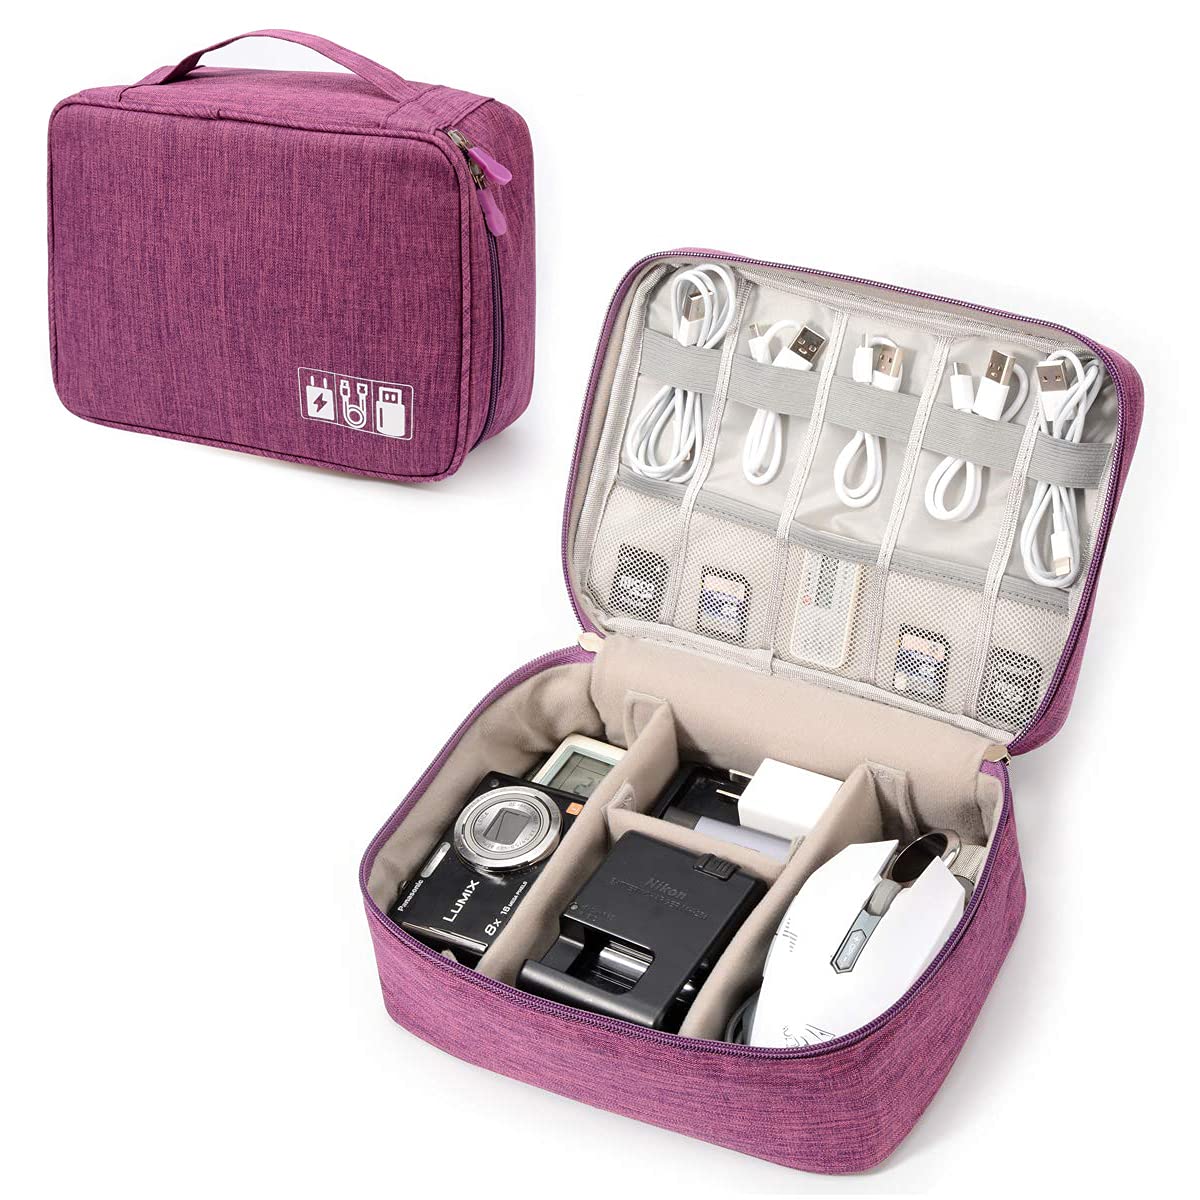 Electronic Organizer Travel Universal Cable Organizer Electronics Accessories Storage Bag Gadget Gear Cases for iPad Mini, Kindle, Smartphone, Cable, Charger, Power Bank, USB, SD Card (Purple)